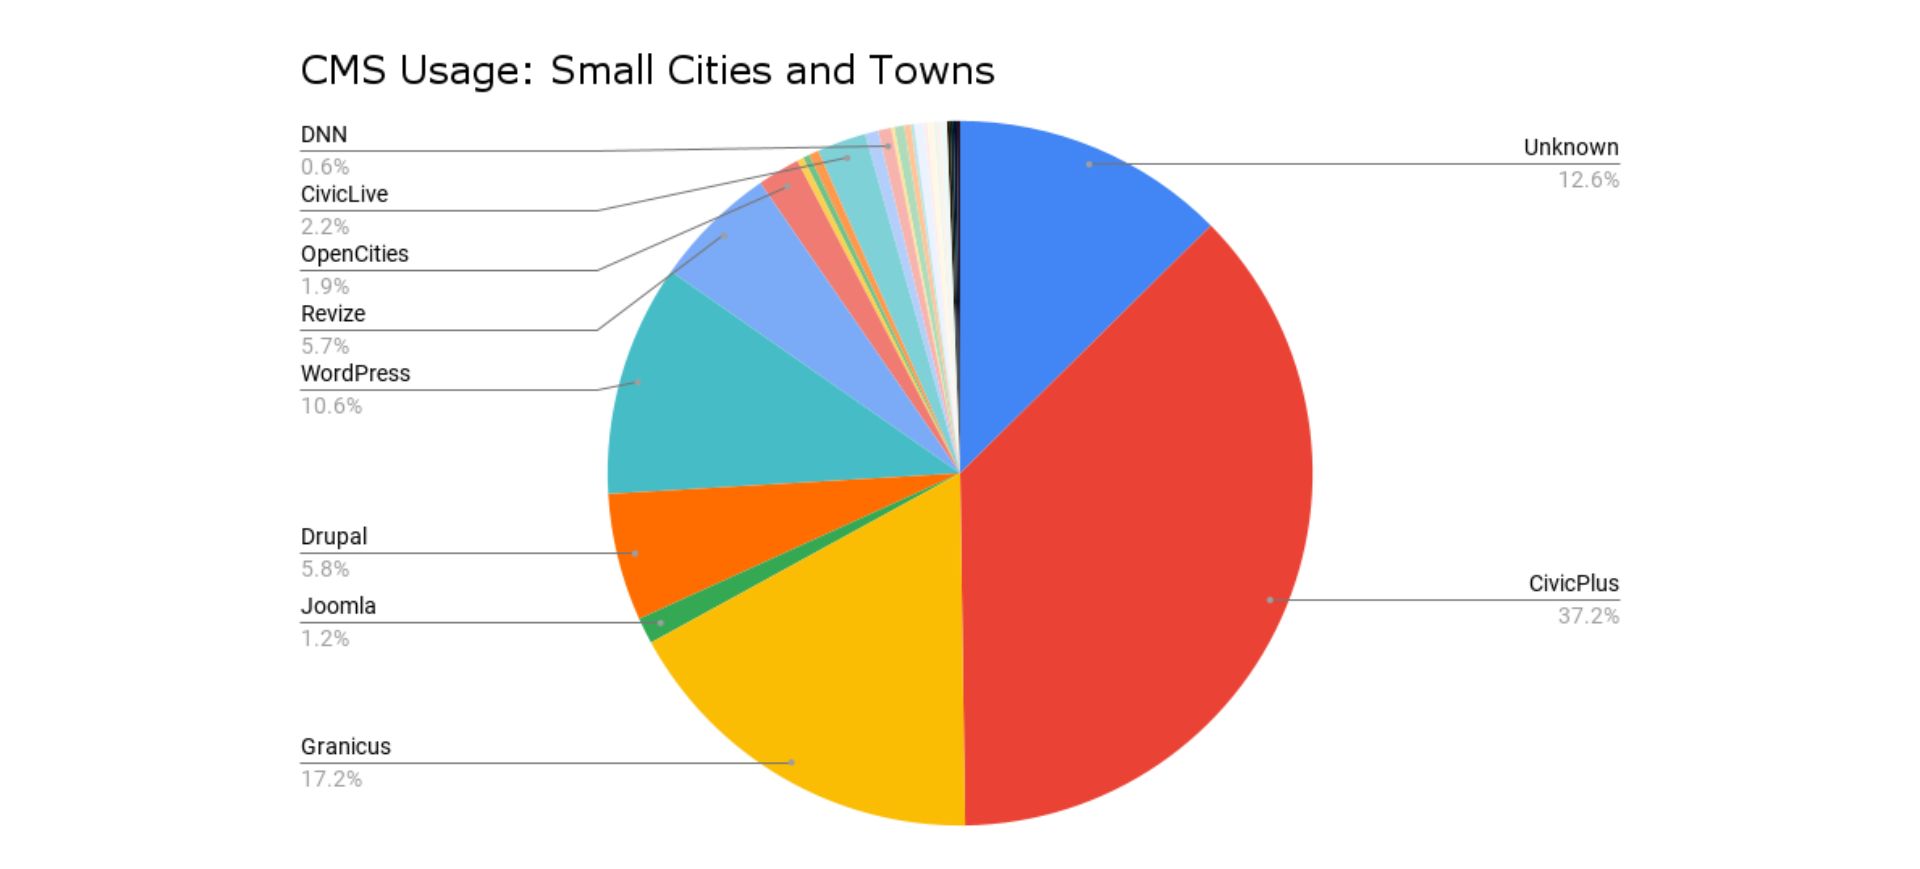 cms usage: small cities